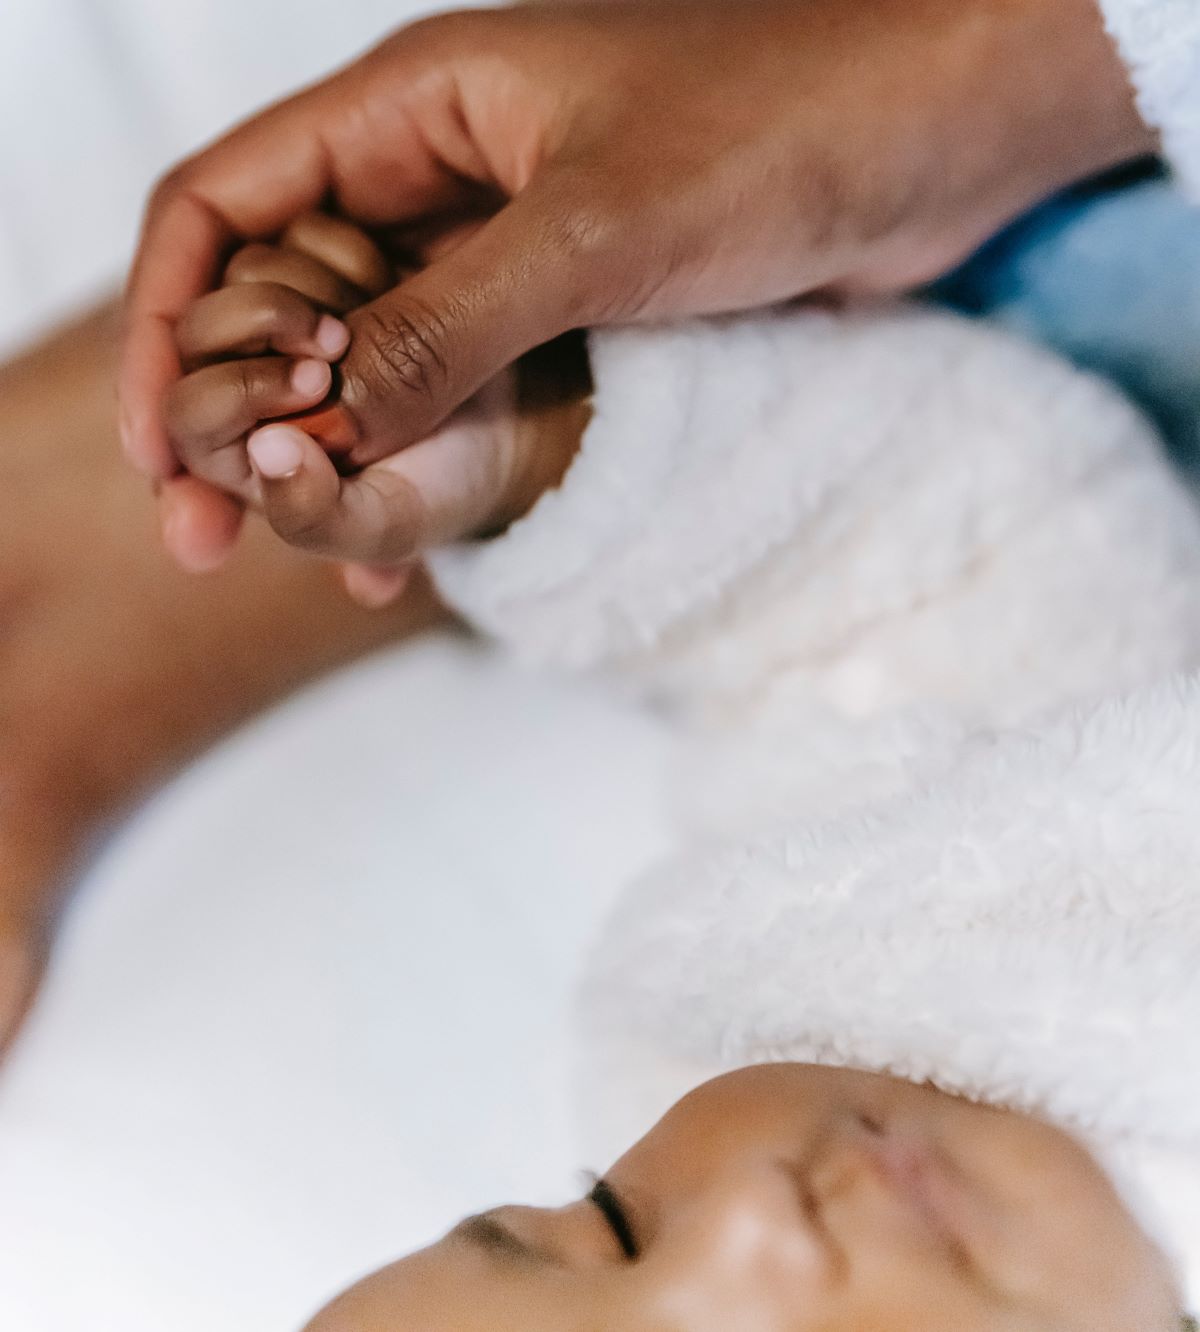 baby that was injured during birth and mom holding hands